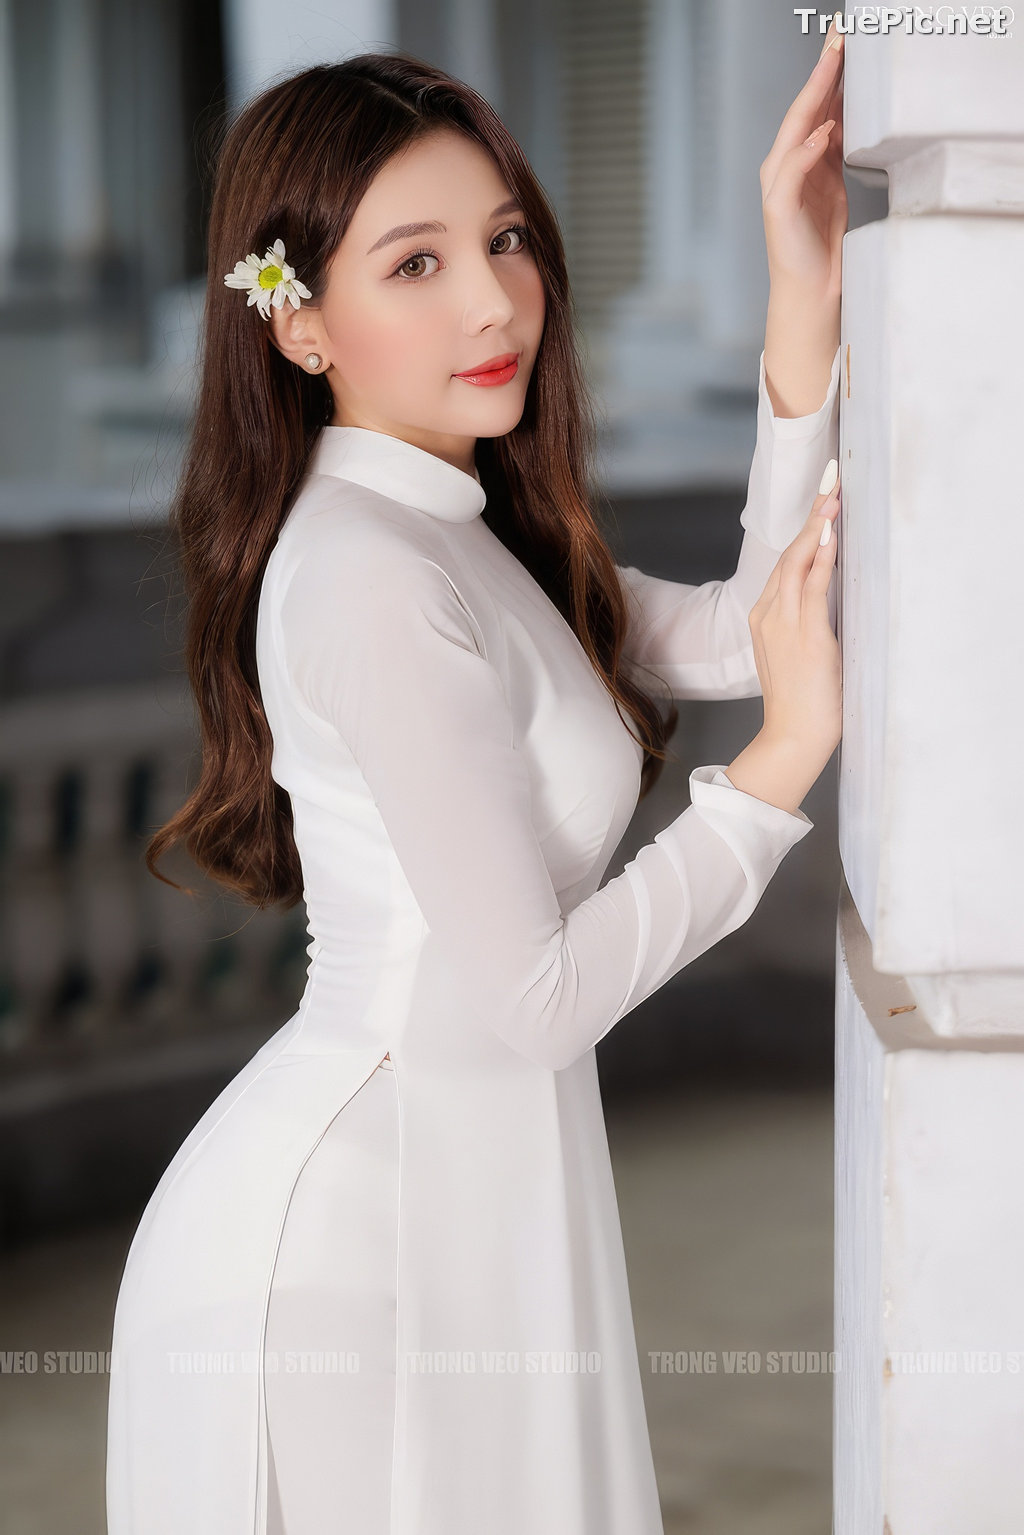 Image Vietnamese Model - Beautiful Girl and Daisy Flower - TruePic.net (129 pictures) - Picture-92